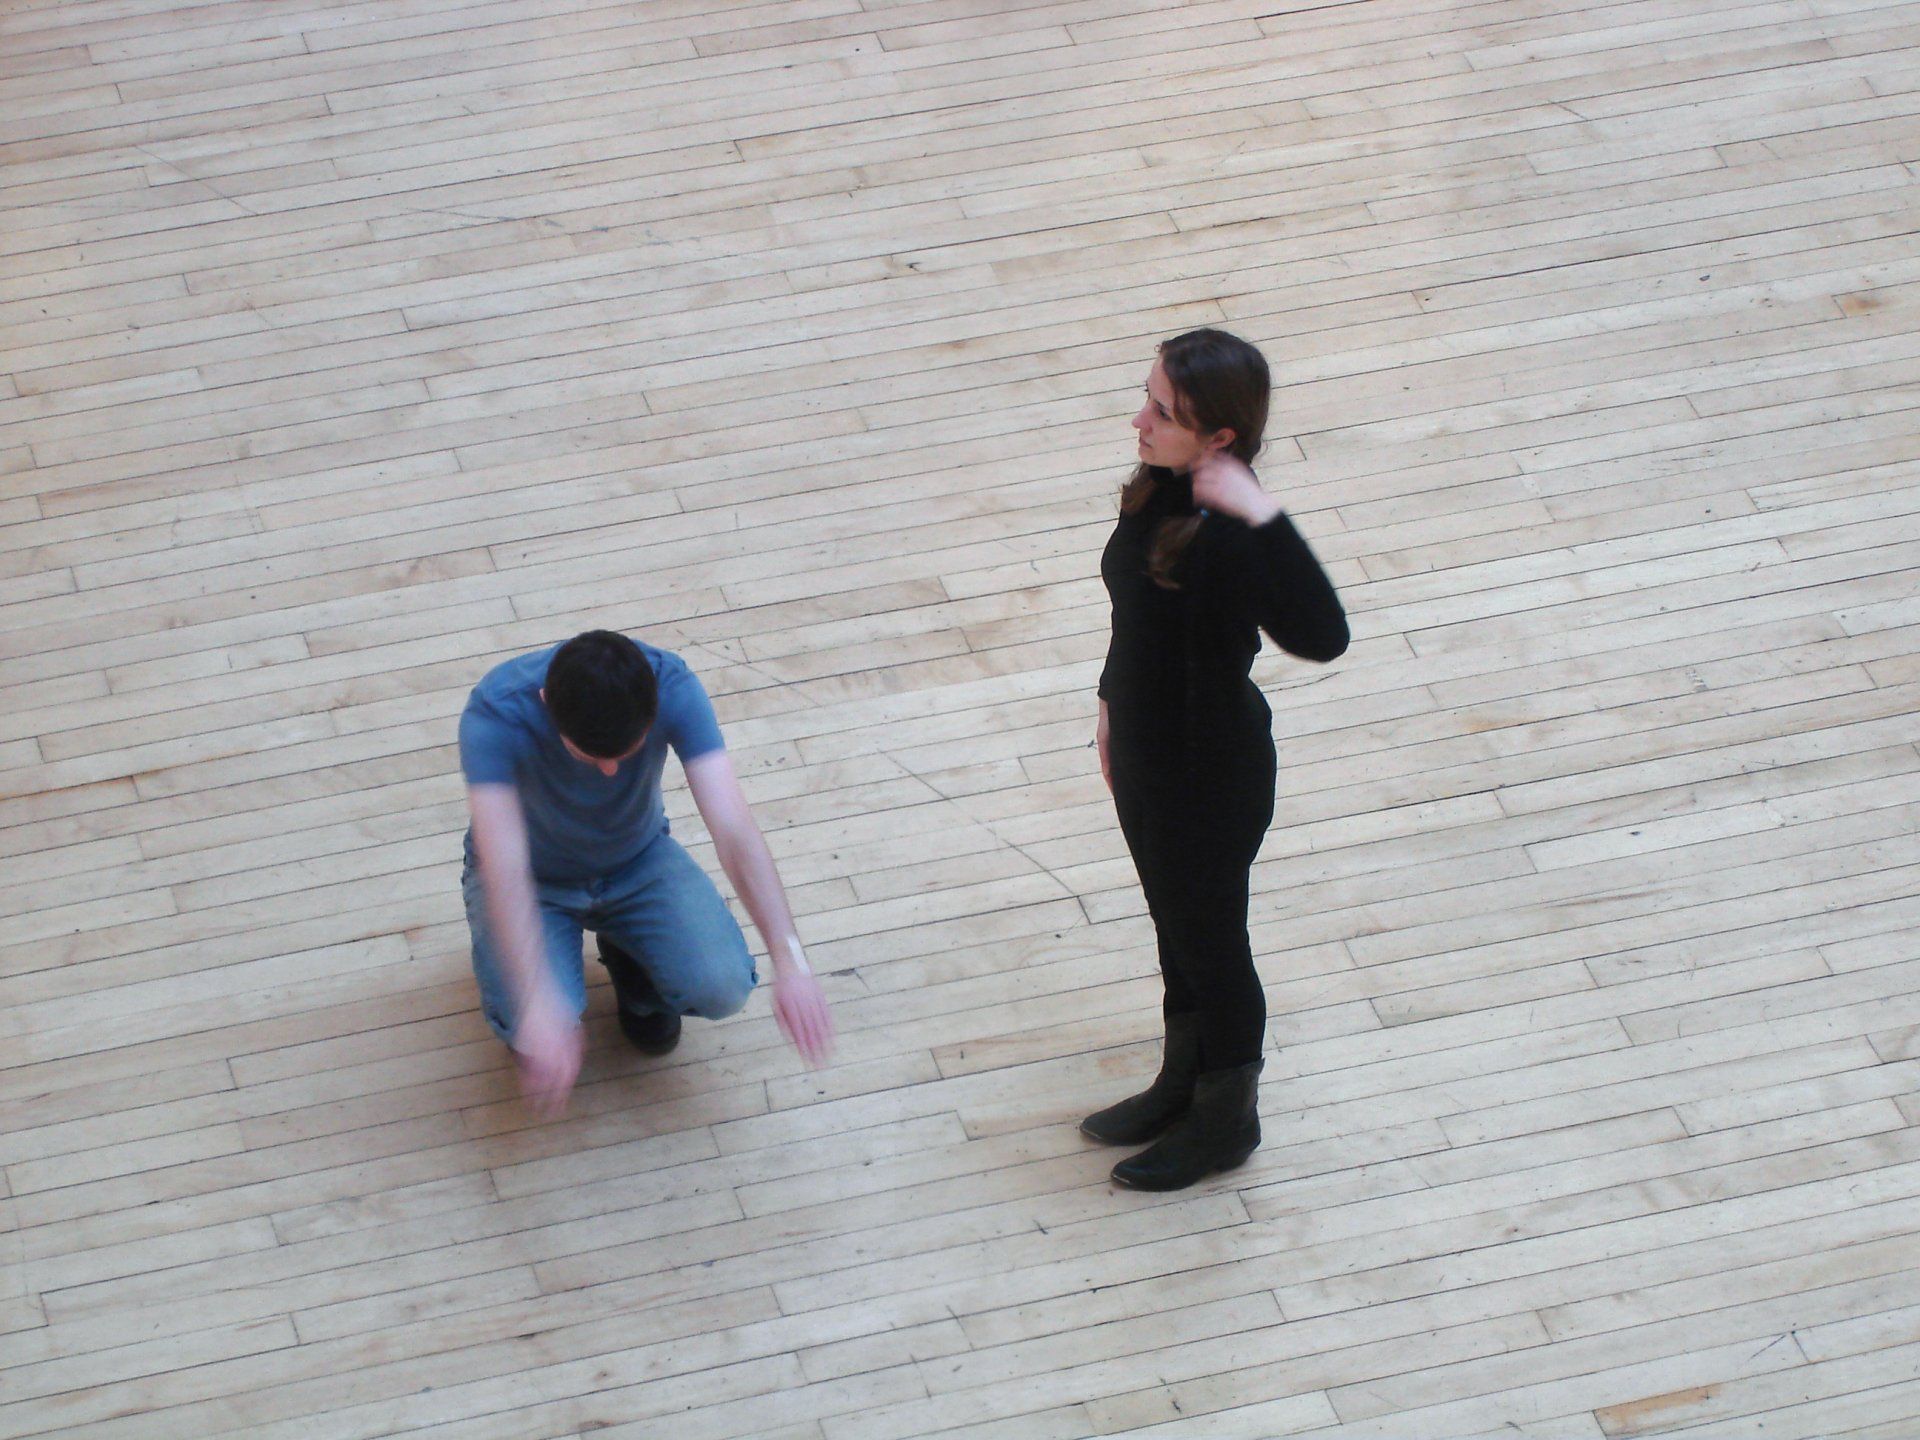 a man and a woman are standing on a wooden floor